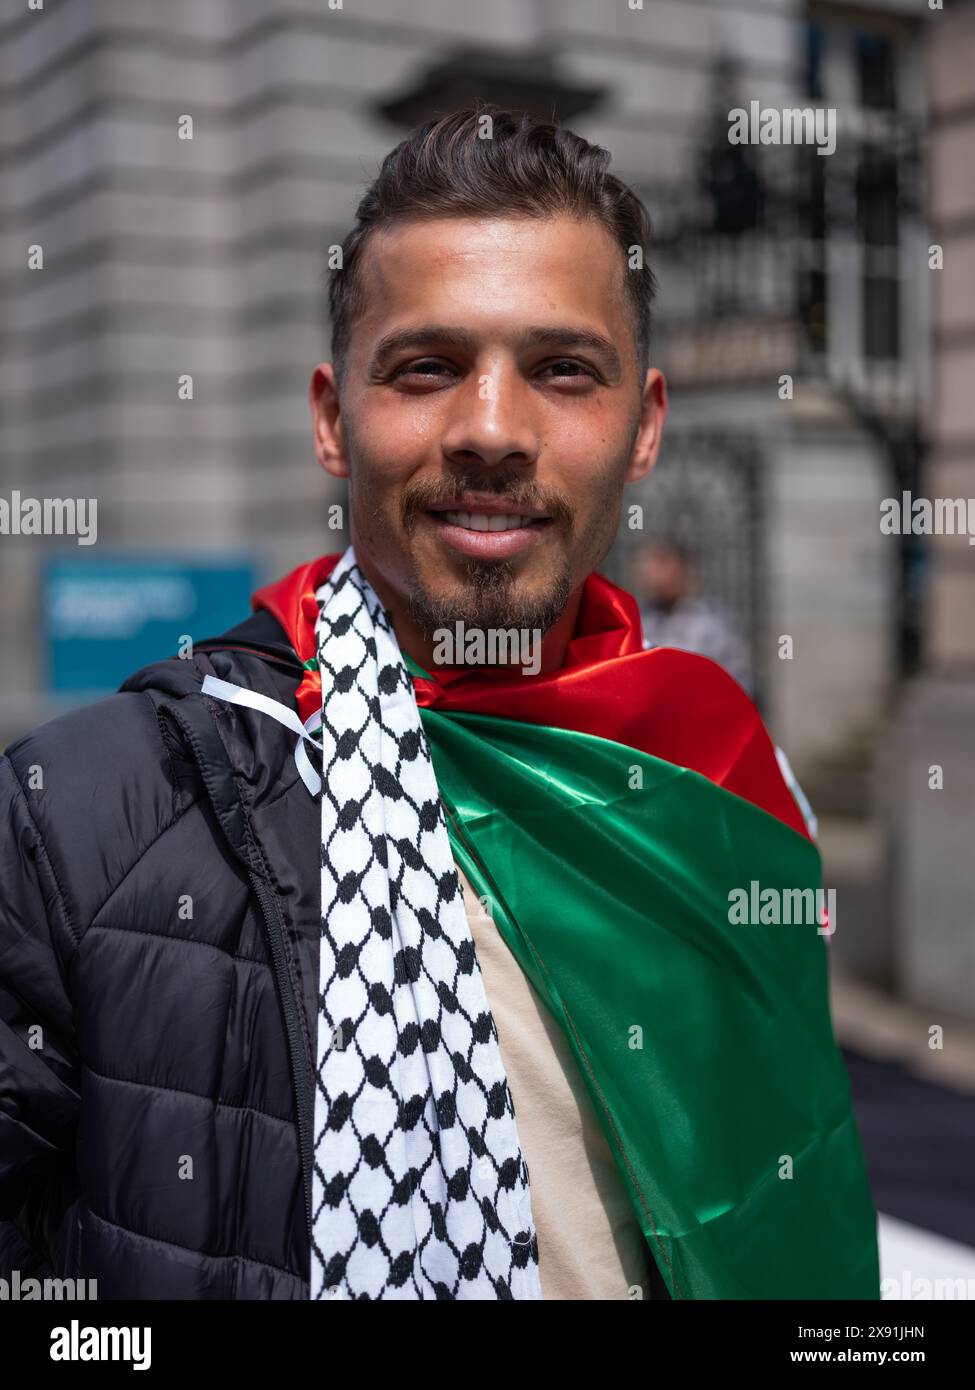 Pro Palestinian protesters outside the Dáil Éireann on Kildare Street in Dublin city, as Ireland officially recognised the Palestinian state. Stock Photo